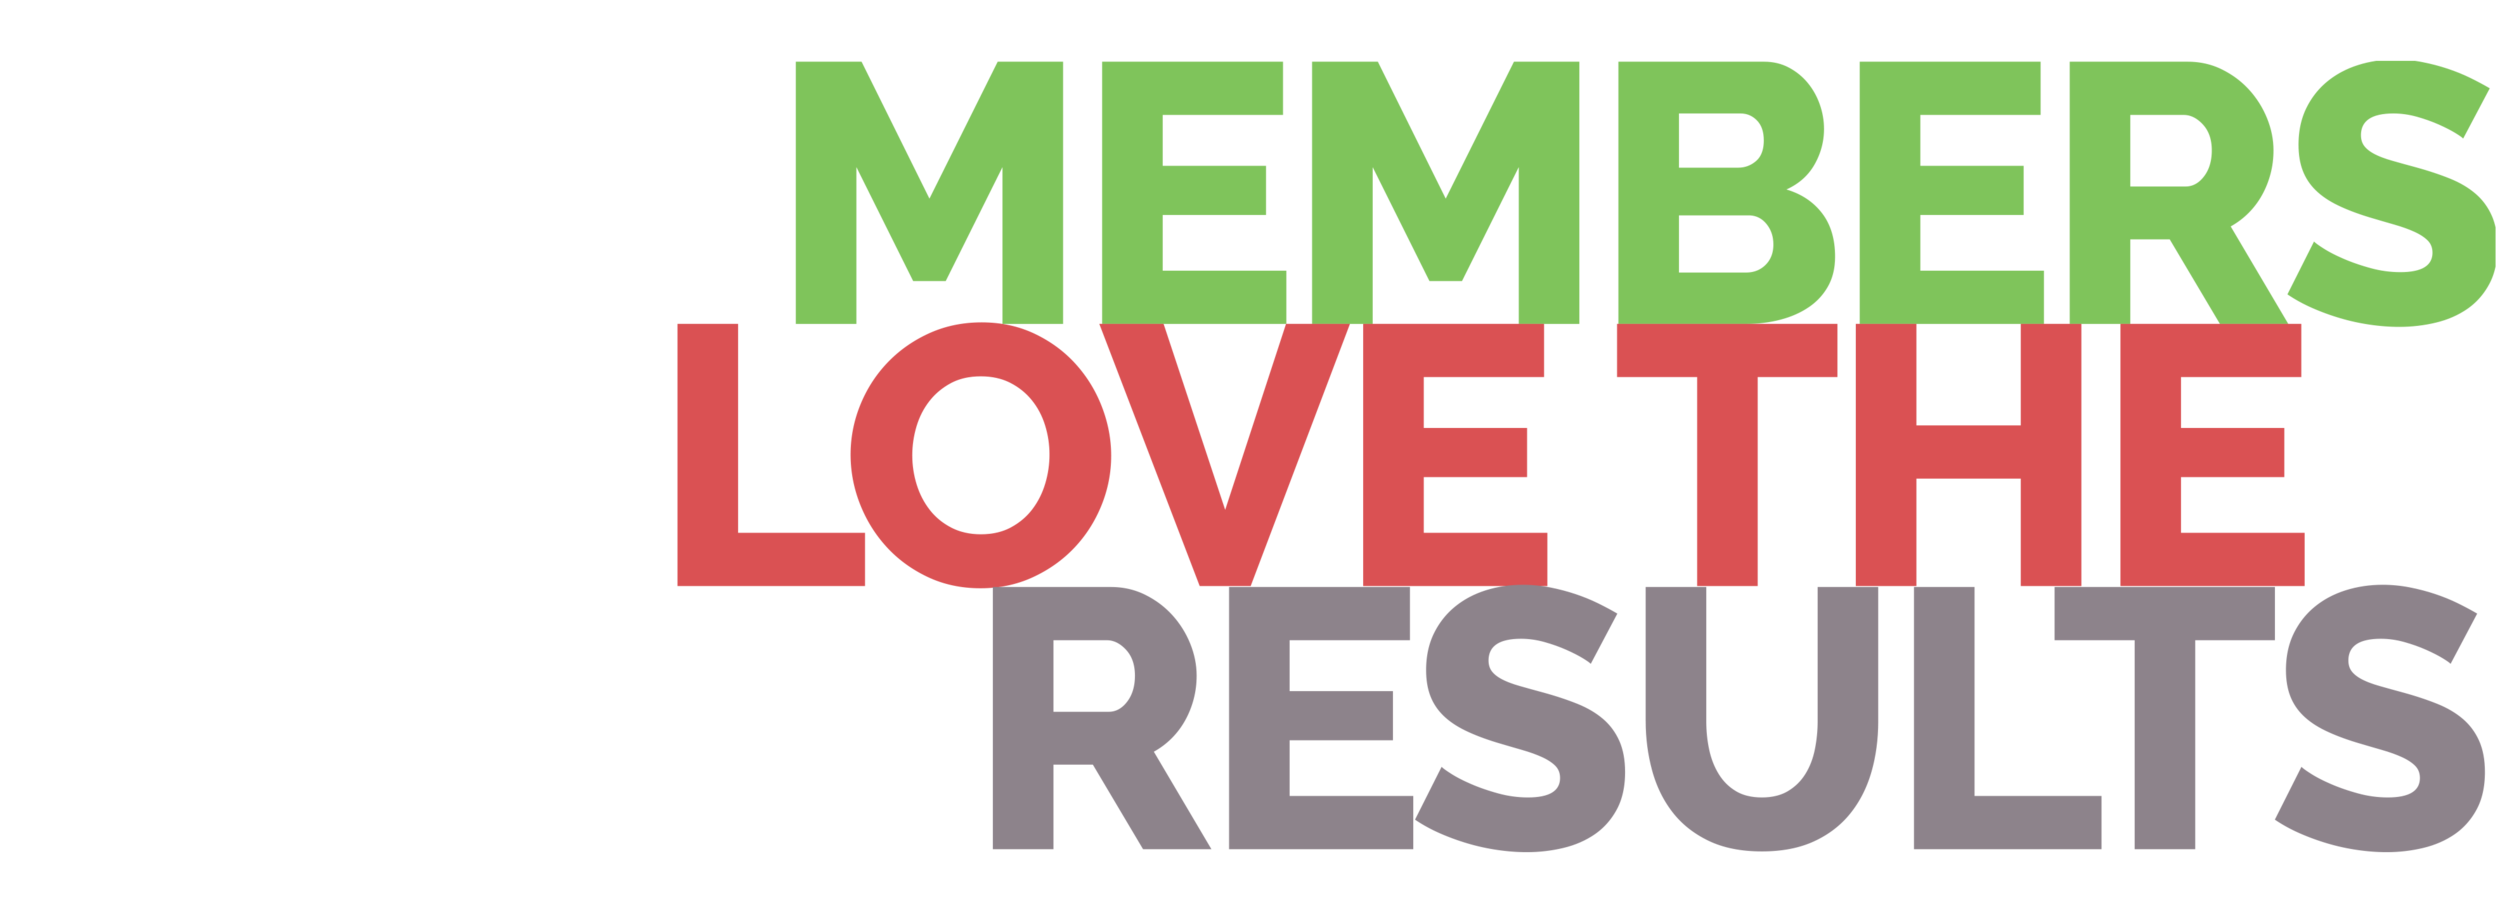 MEMBERS LOVE THE RESULTS.png